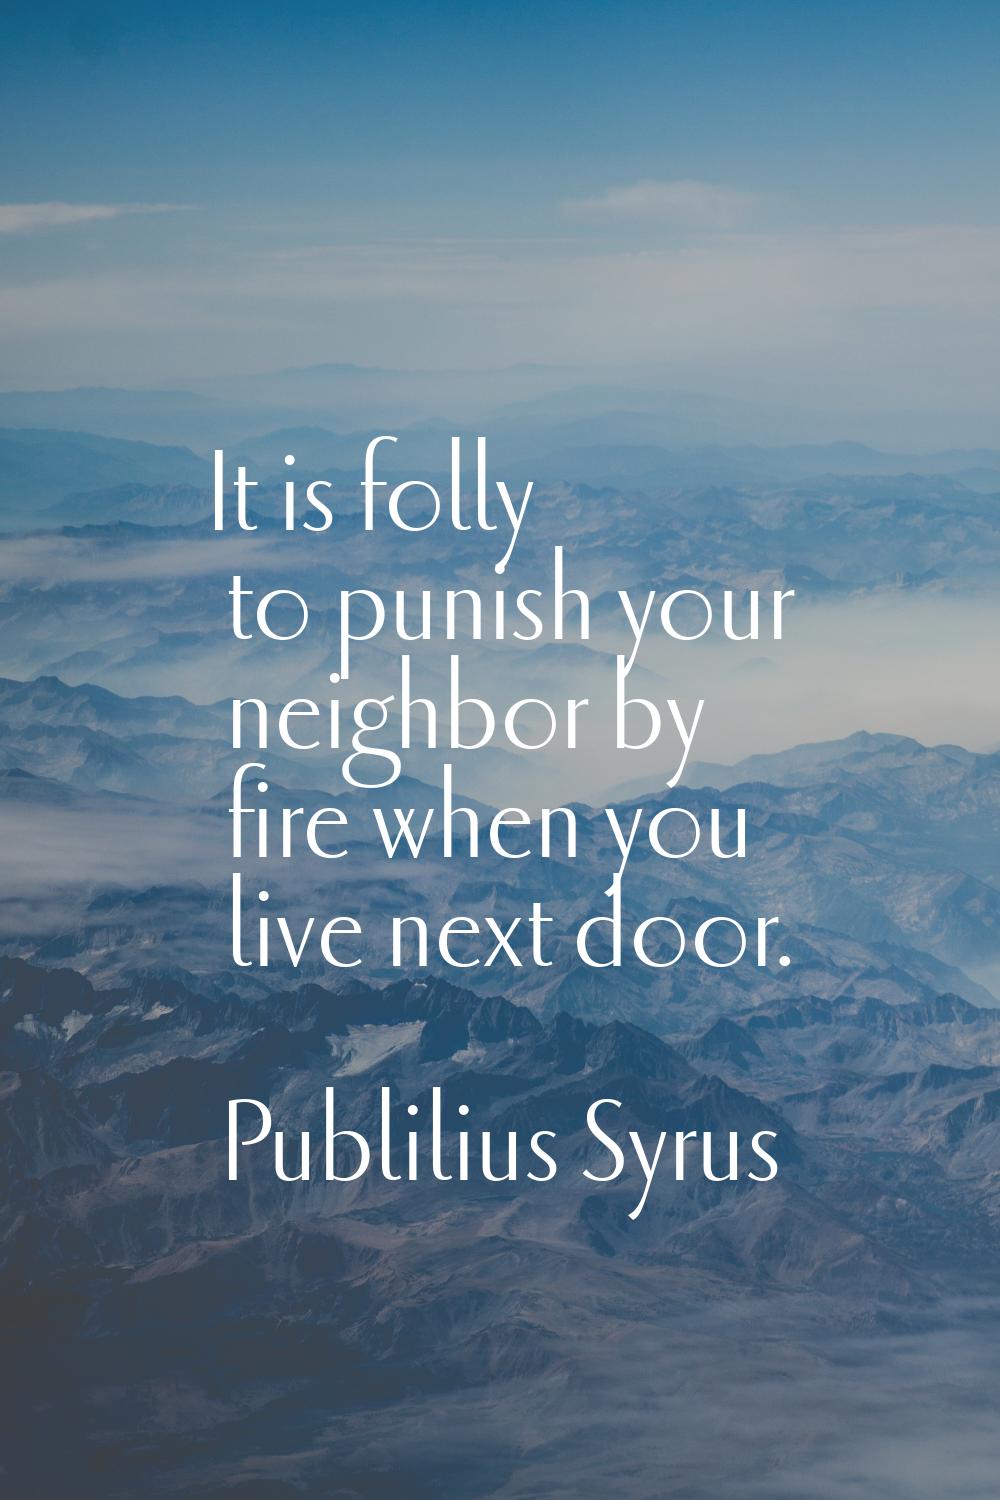 It is folly to punish your neighbor by fire when you live next door.